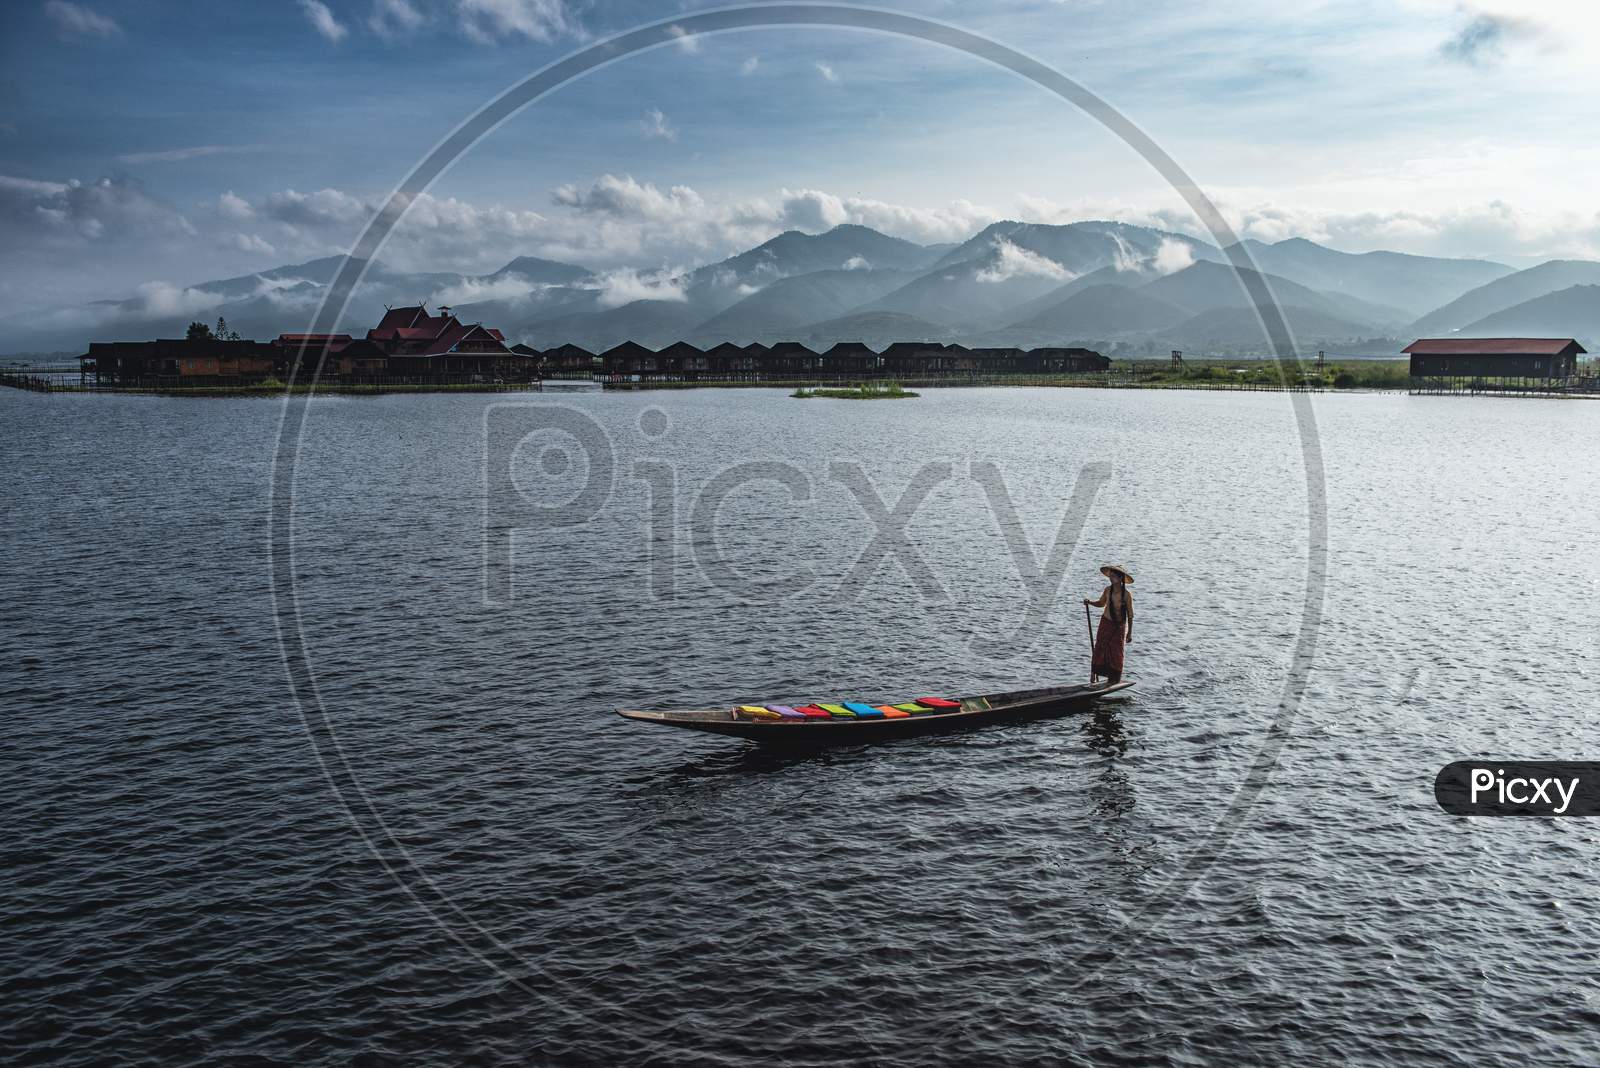 A Woman With Handcrafted Colorful Lotus Fabrics On Her Boat In In Dain Khone Village, On Inle Lake, Myanmar. She Sending The Fabrics Out As Finished Products In The Market.